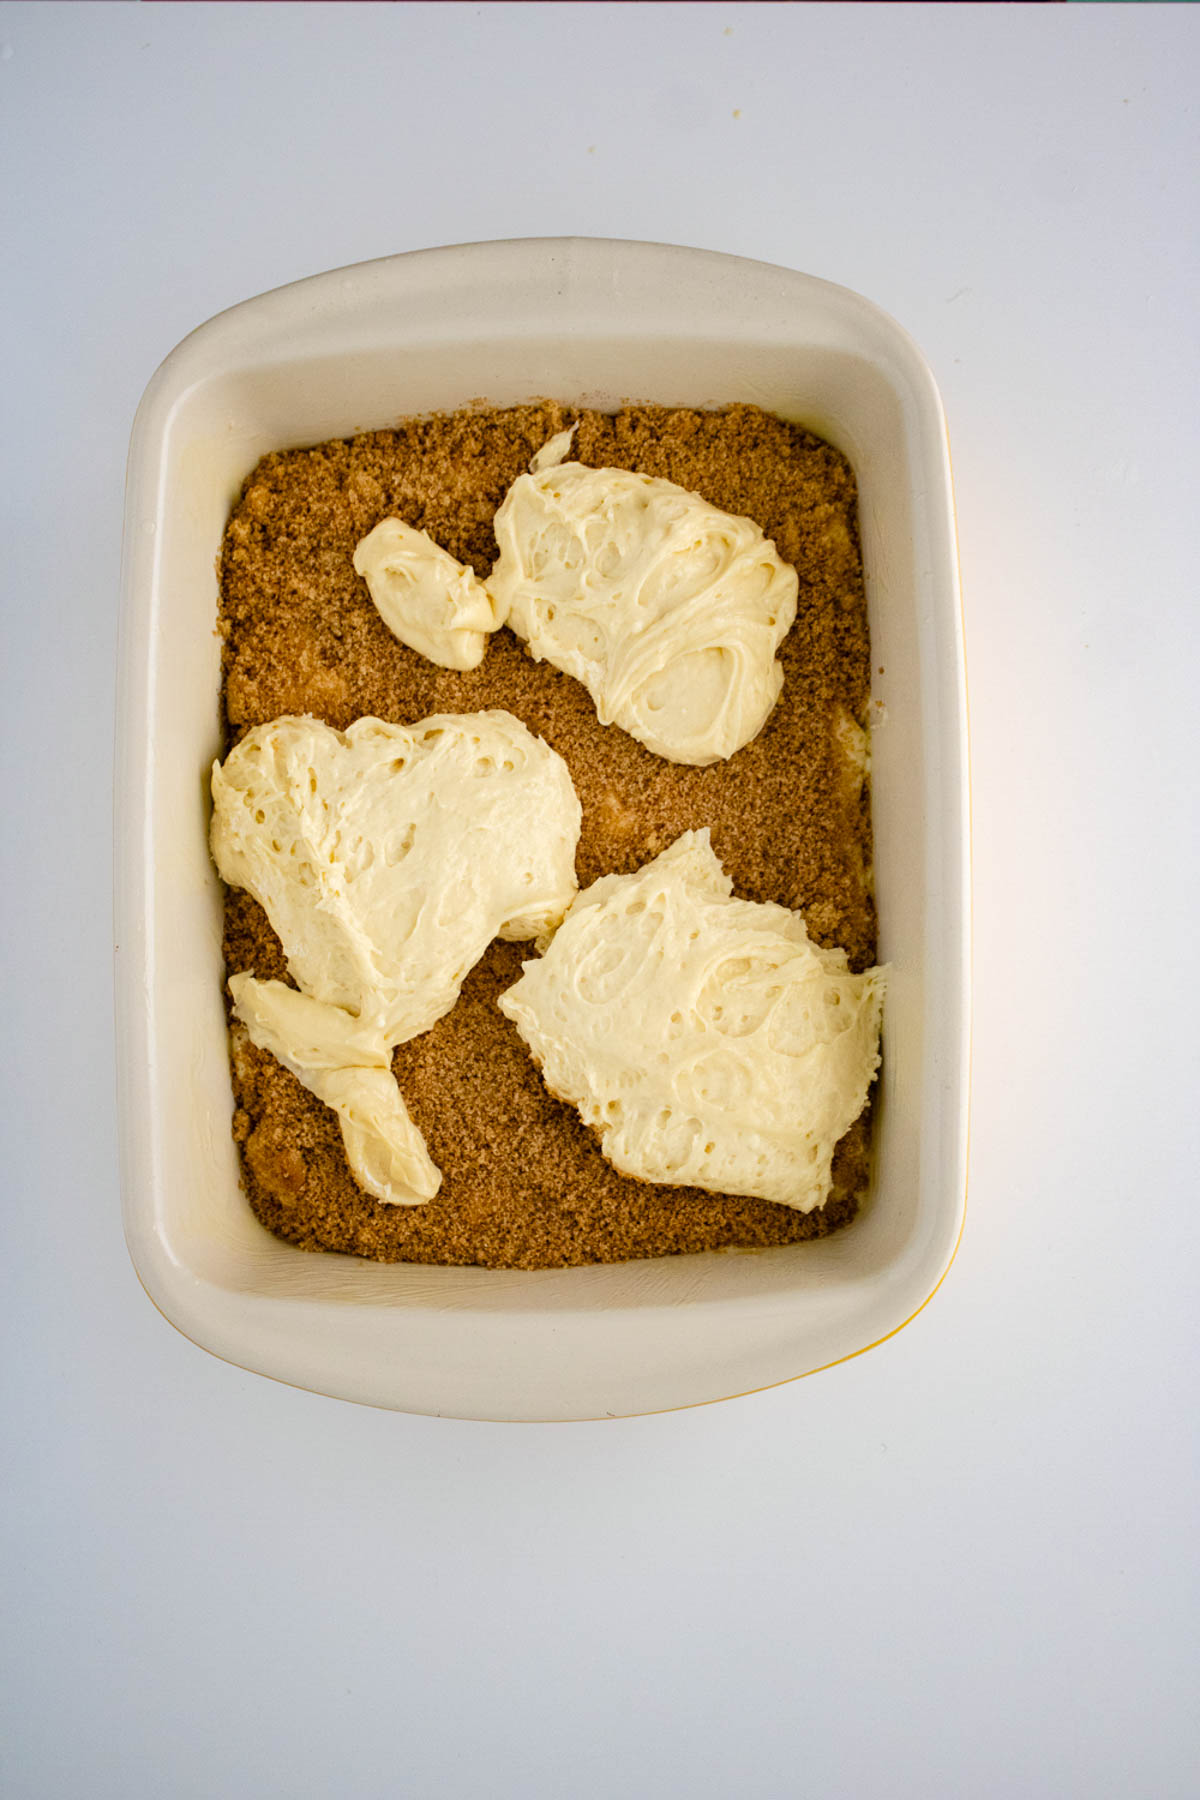 A rectangular baking dish with a layer of brown crumble topped with four dollops of white cream shaped like leaves, perfect for any dessert recipe.